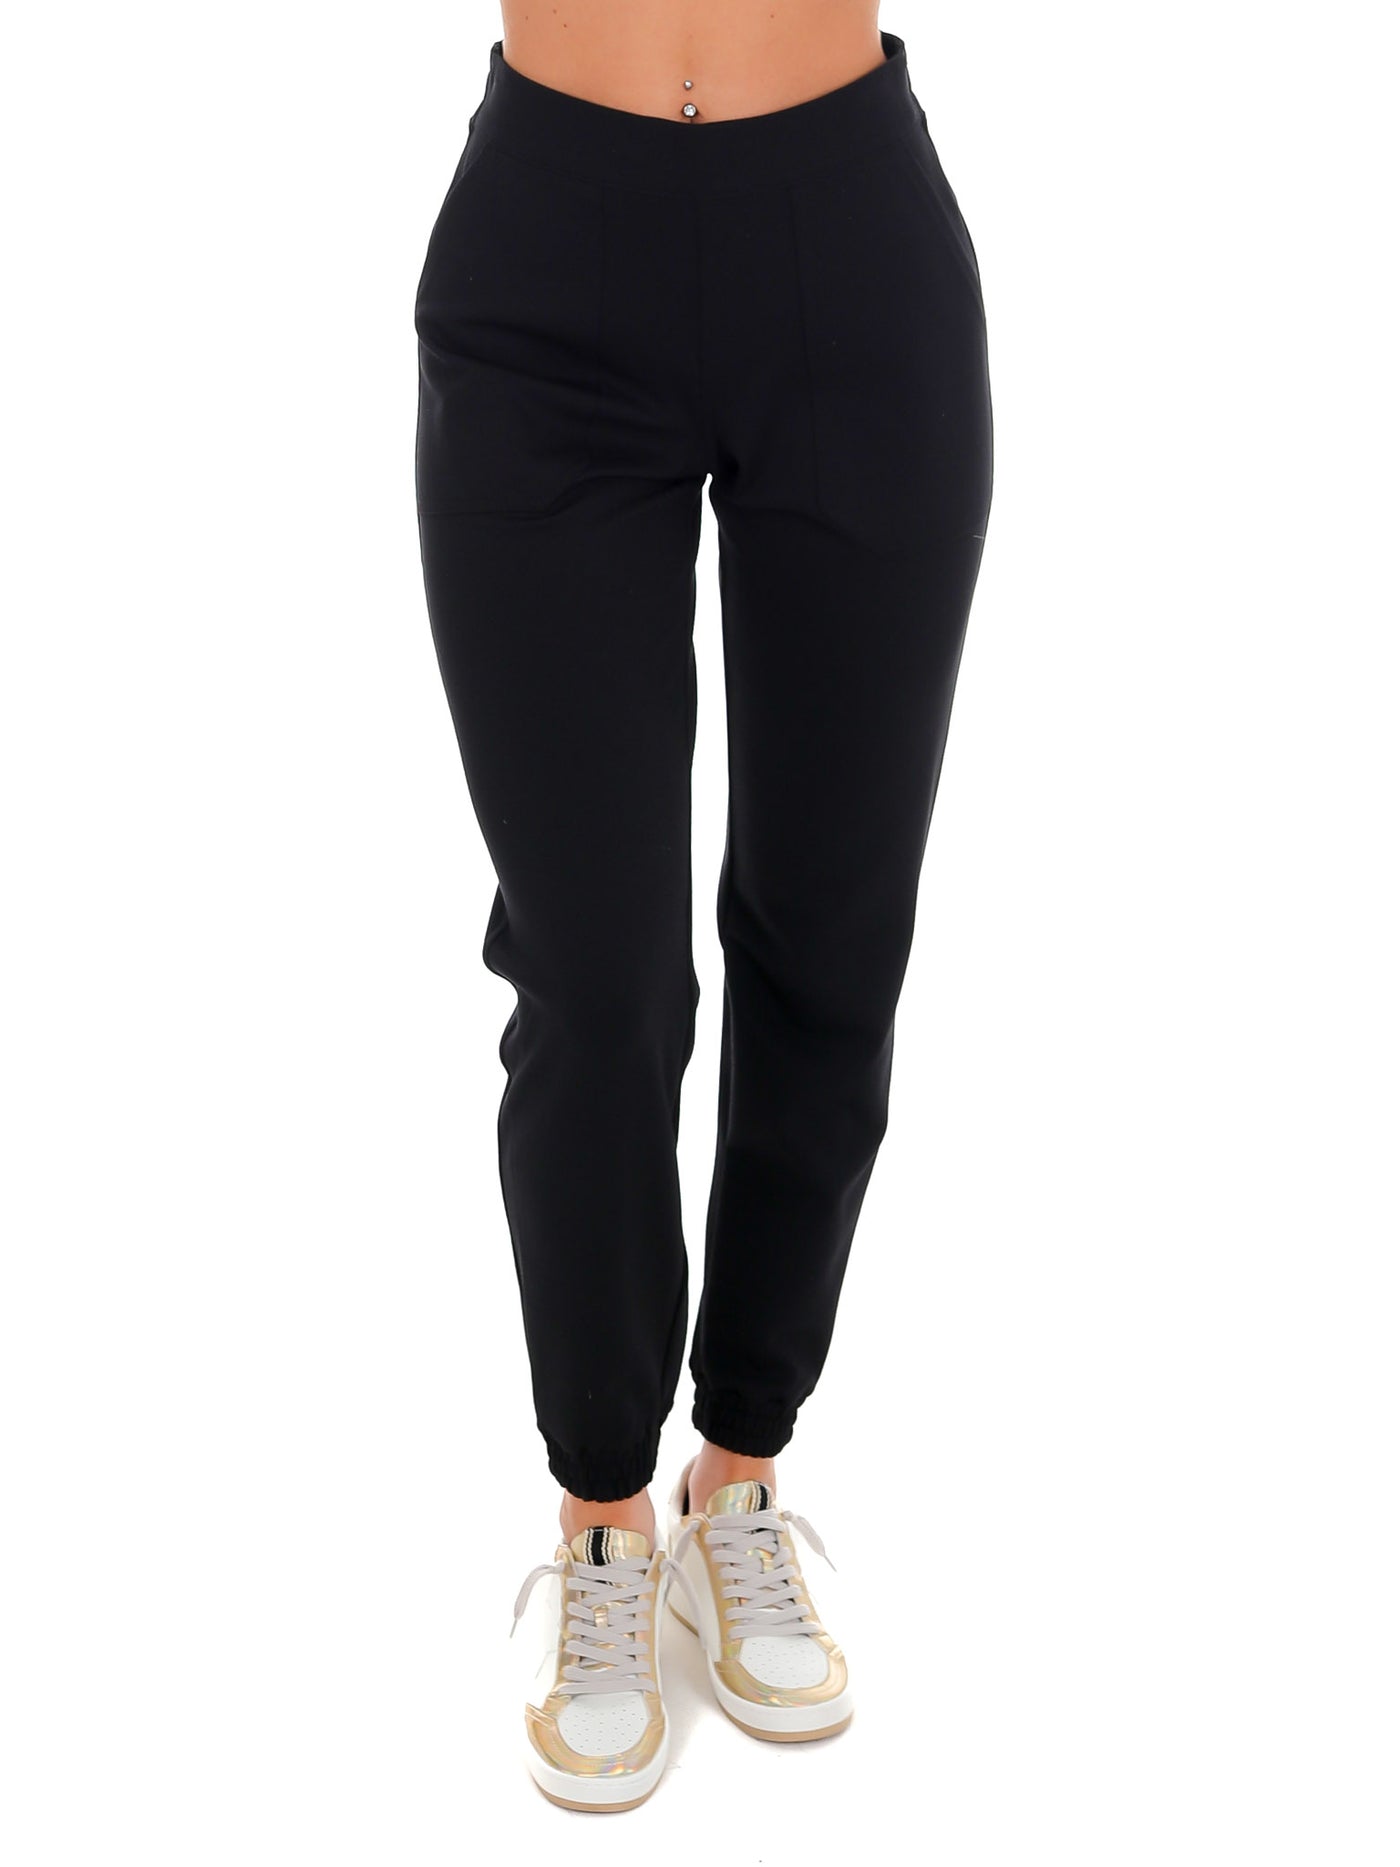 Spanx The Perfect Pant Jogger